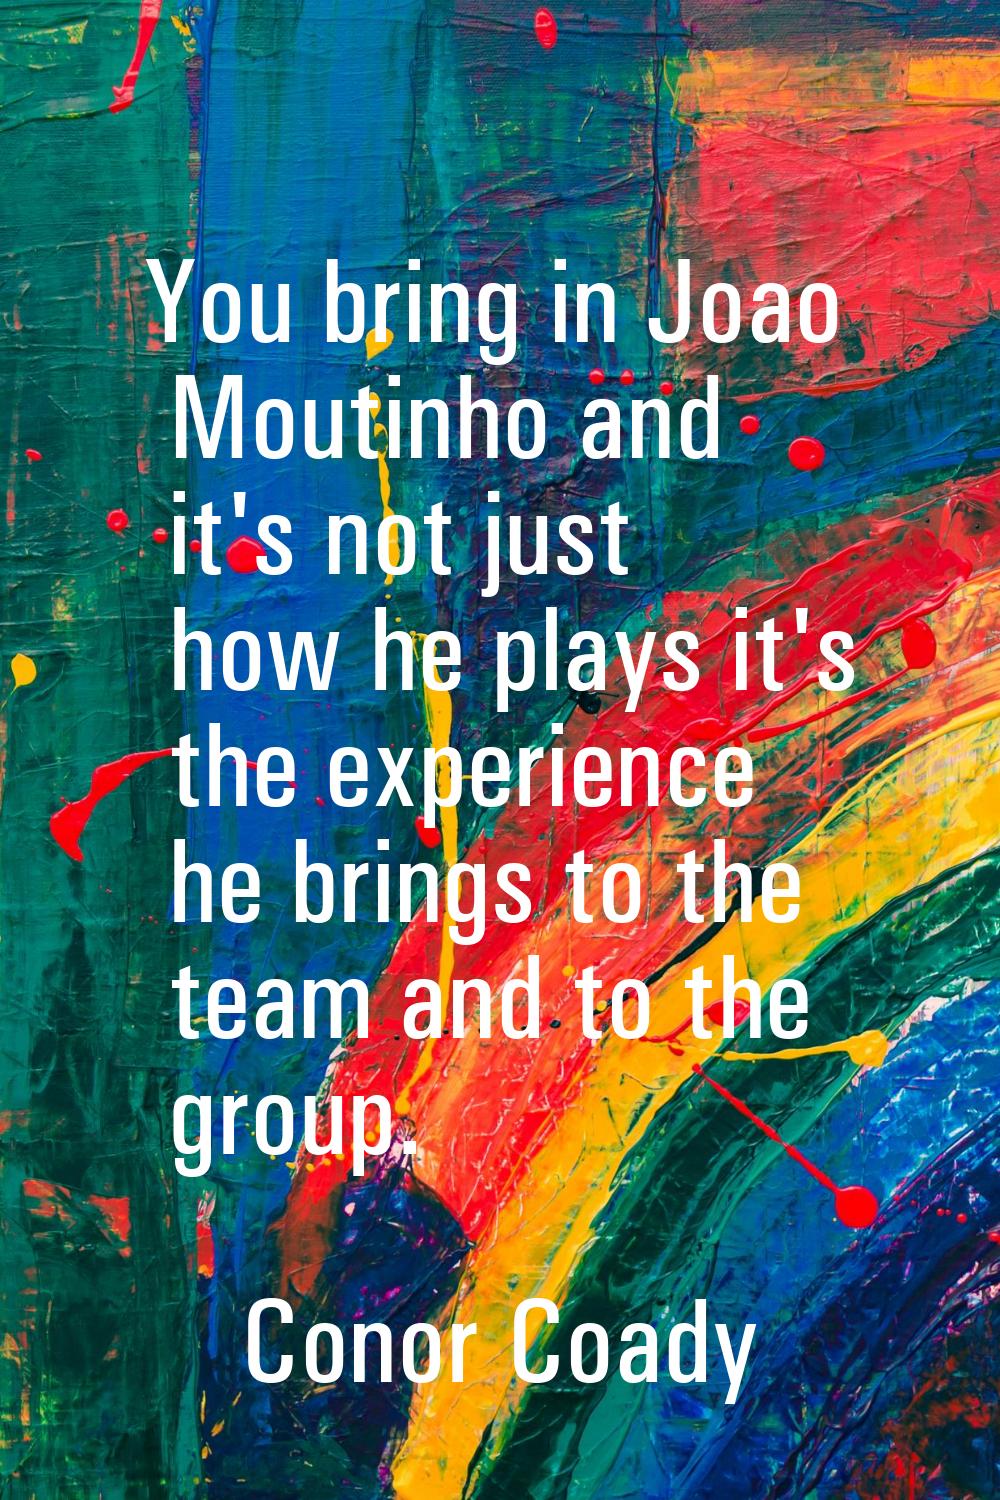 You bring in Joao Moutinho and it's not just how he plays it's the experience he brings to the team